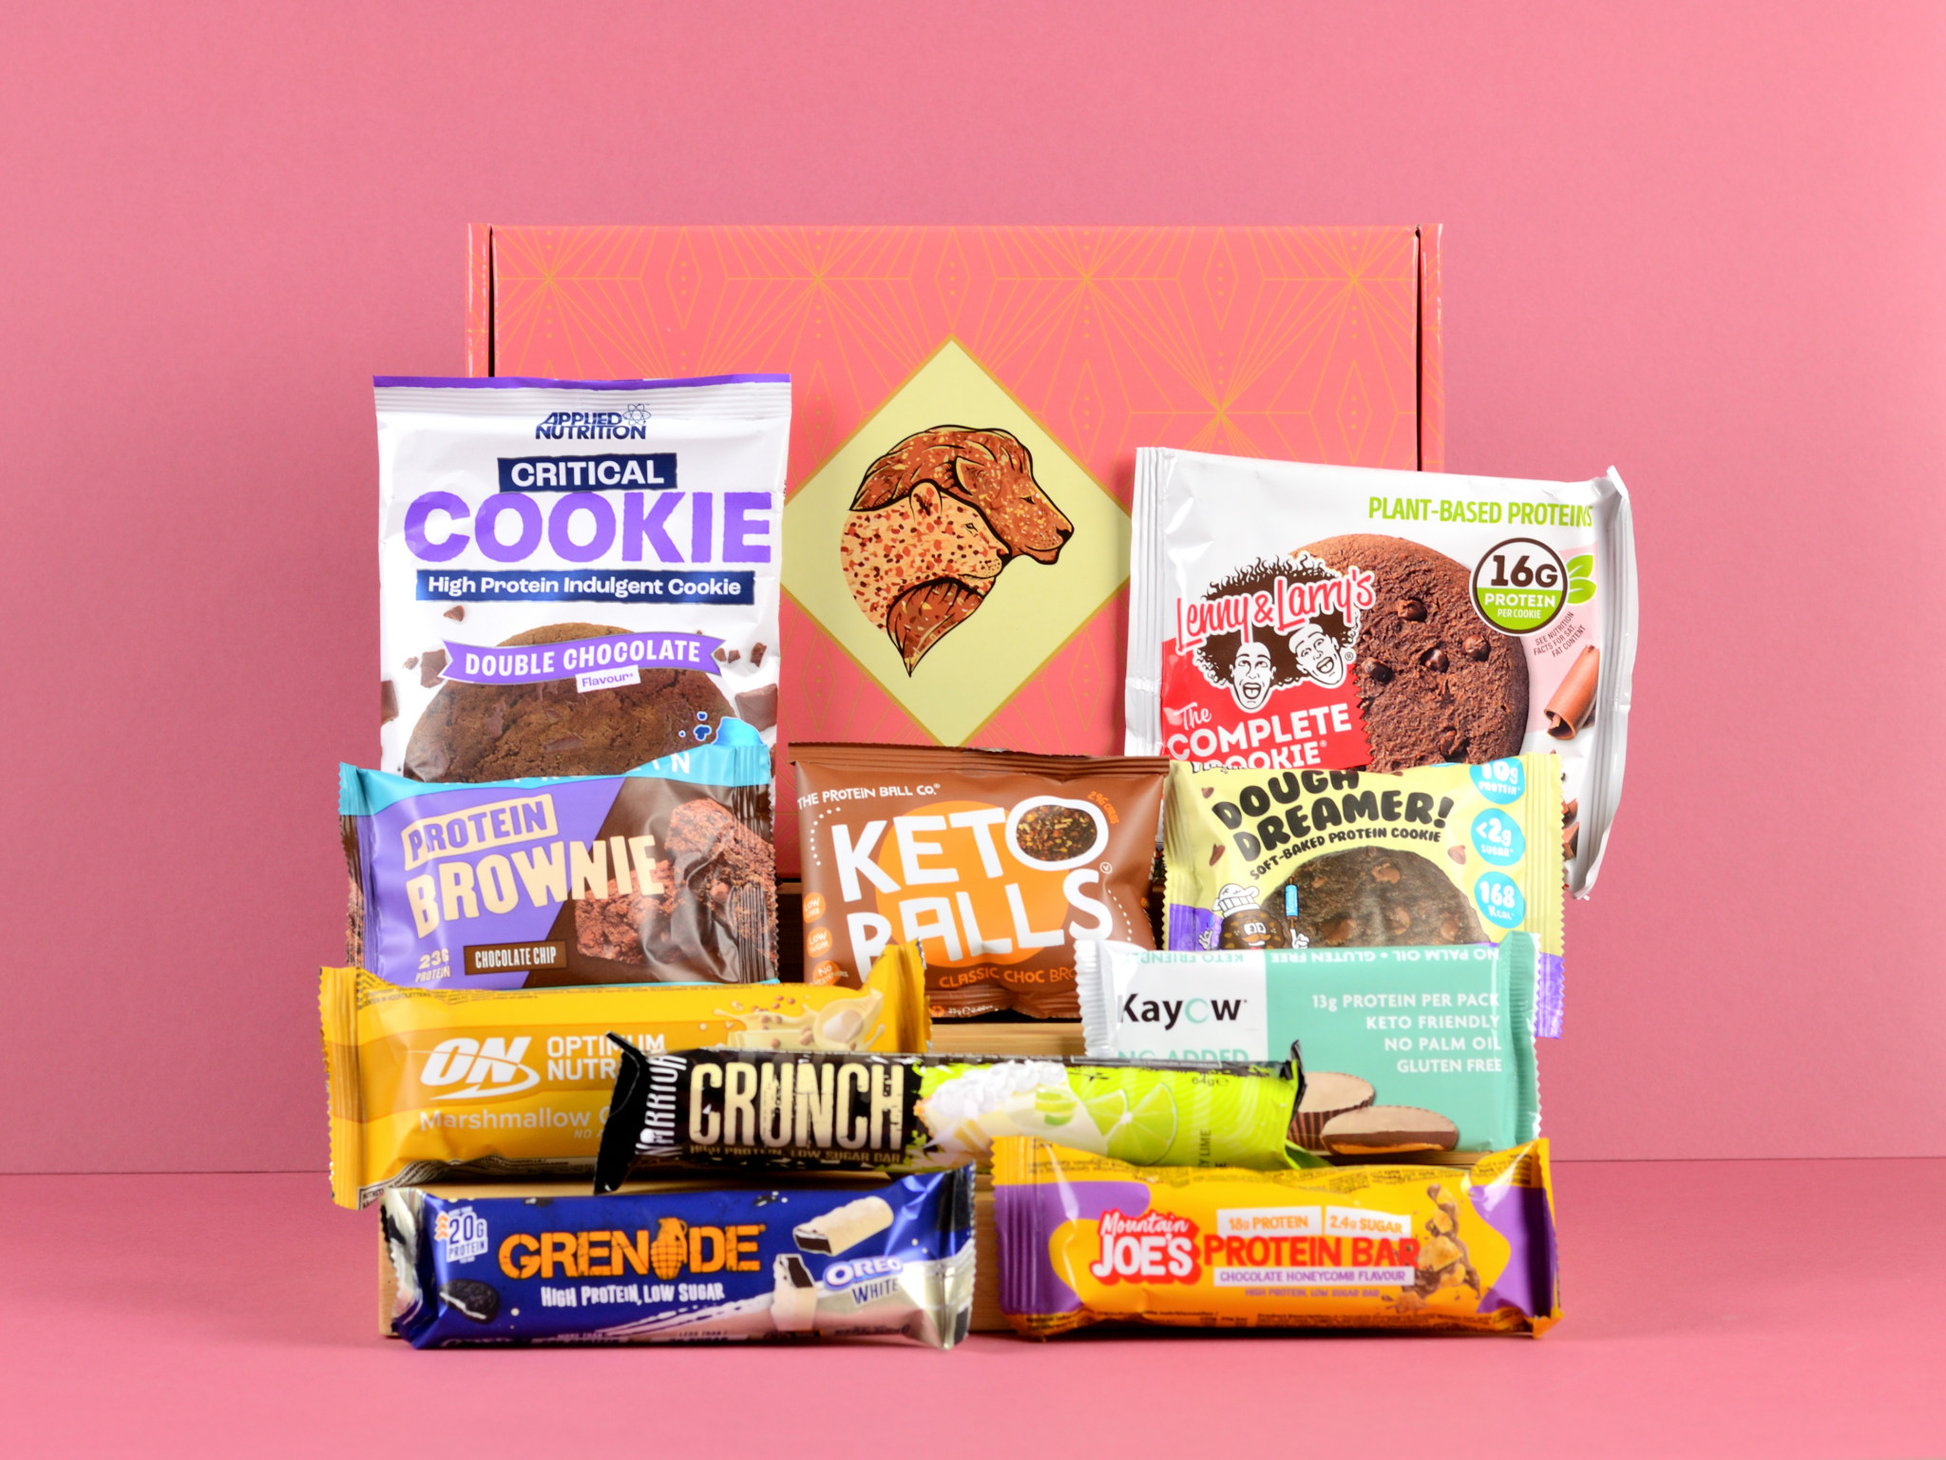 Box Of Protein | Protein Mothers Day Gift Box | Healthy Mothers Day Protein Snacks Hamper | Kayow, Lenny & Larrys, MyProtein Brownie, Grenade, Mountain Joes, Yummios, Keto Keto, Protein Ball Co., Optimum Nutrition, Warrior Crunch, Applied Nutrition